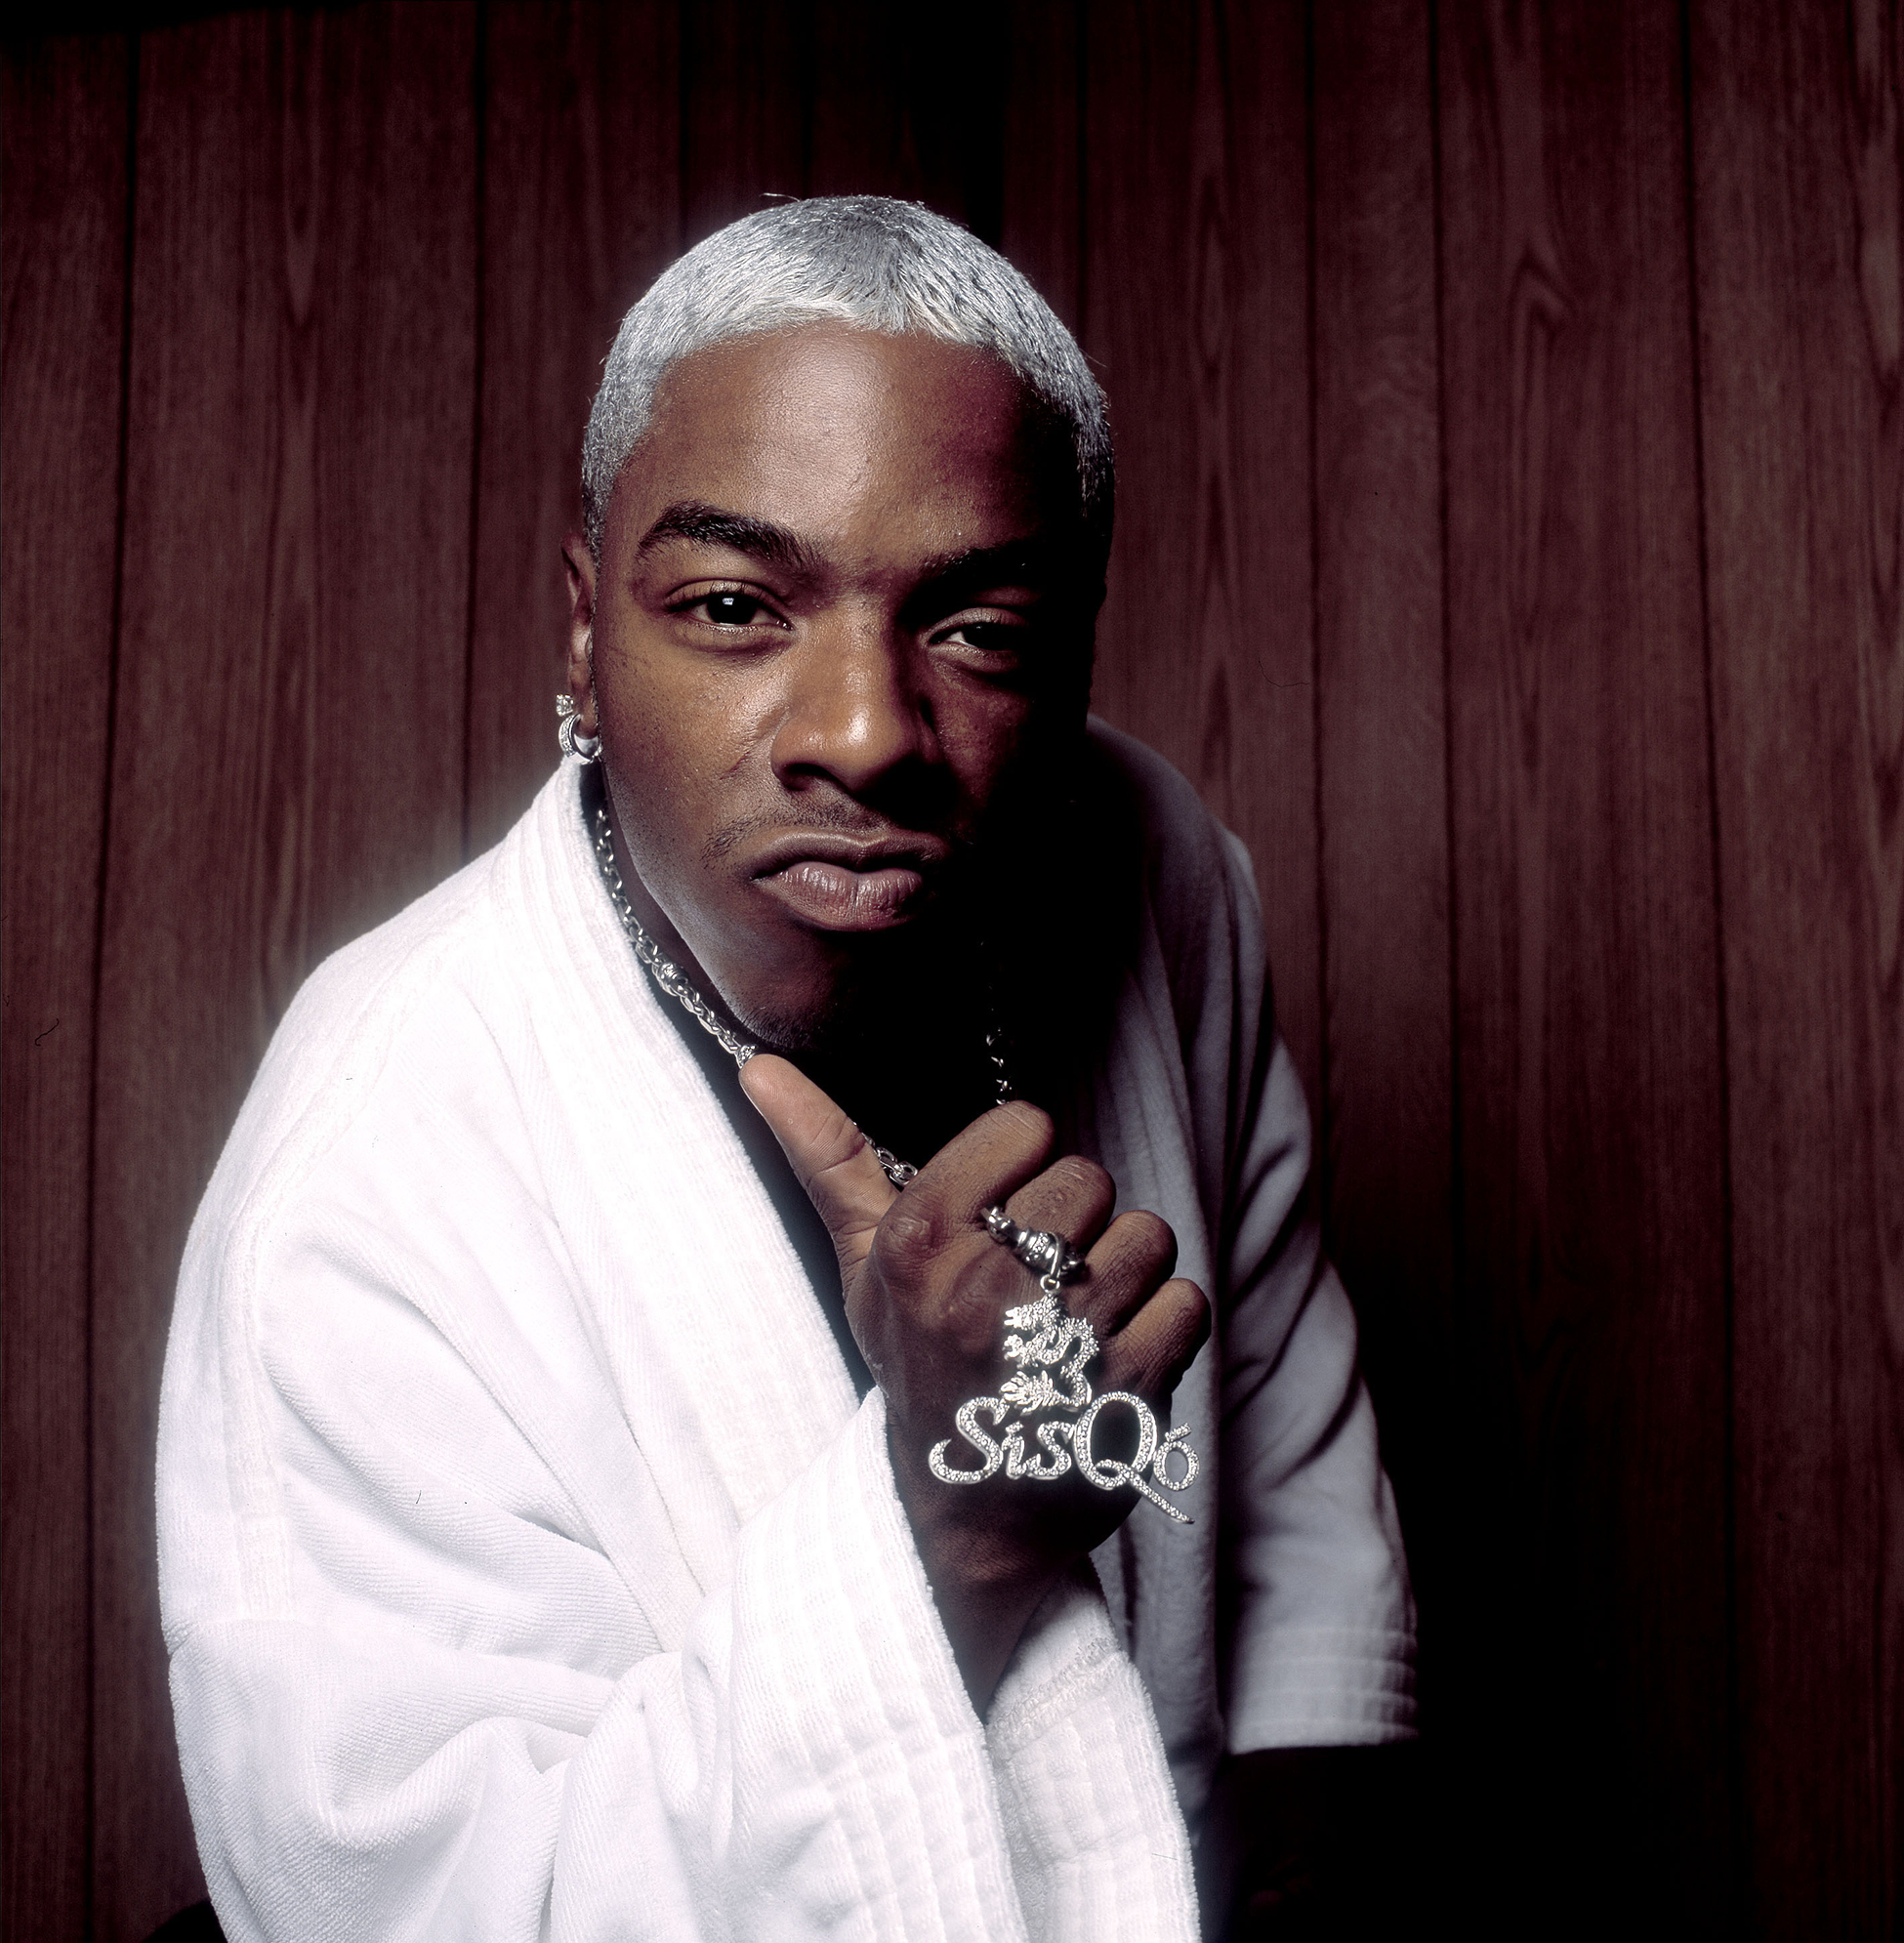 The 2000 Thong Song by Sisqó, particularly the line “That thong thong thong thong thong" boosted thong sales and revitalized the thong swimwear industry.